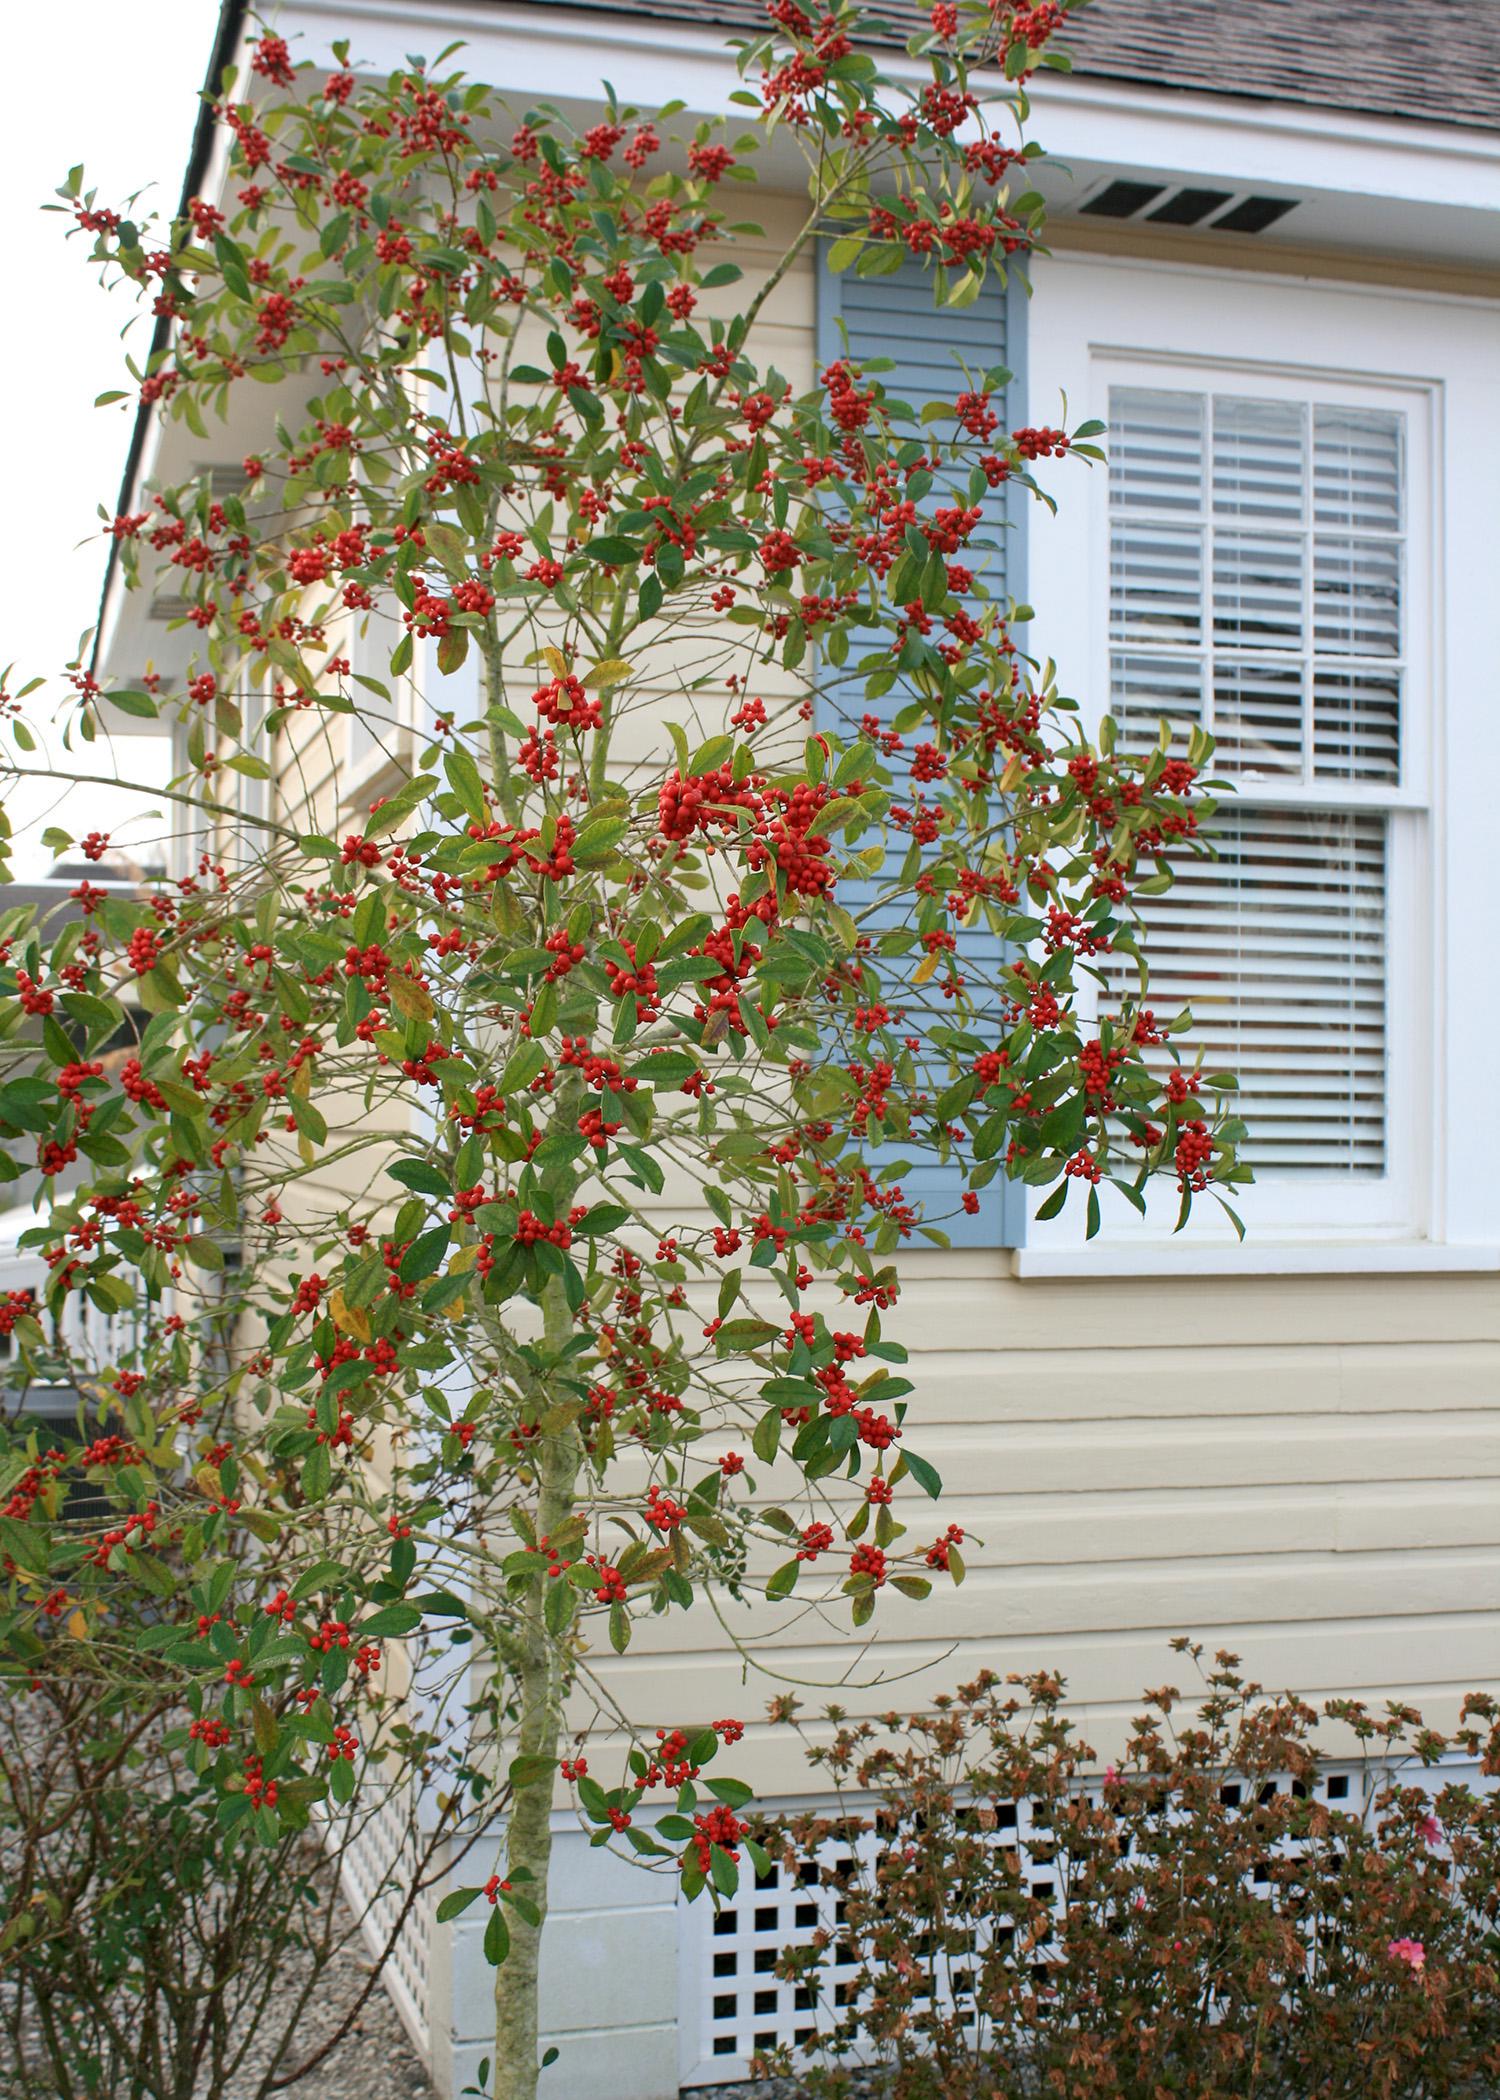 The Savannah holly has a natural pyramidal growth habit that is loose and open. It can be used as a screen or a single specimen. (Photo by MSU Extension Service/Gary Bachman)